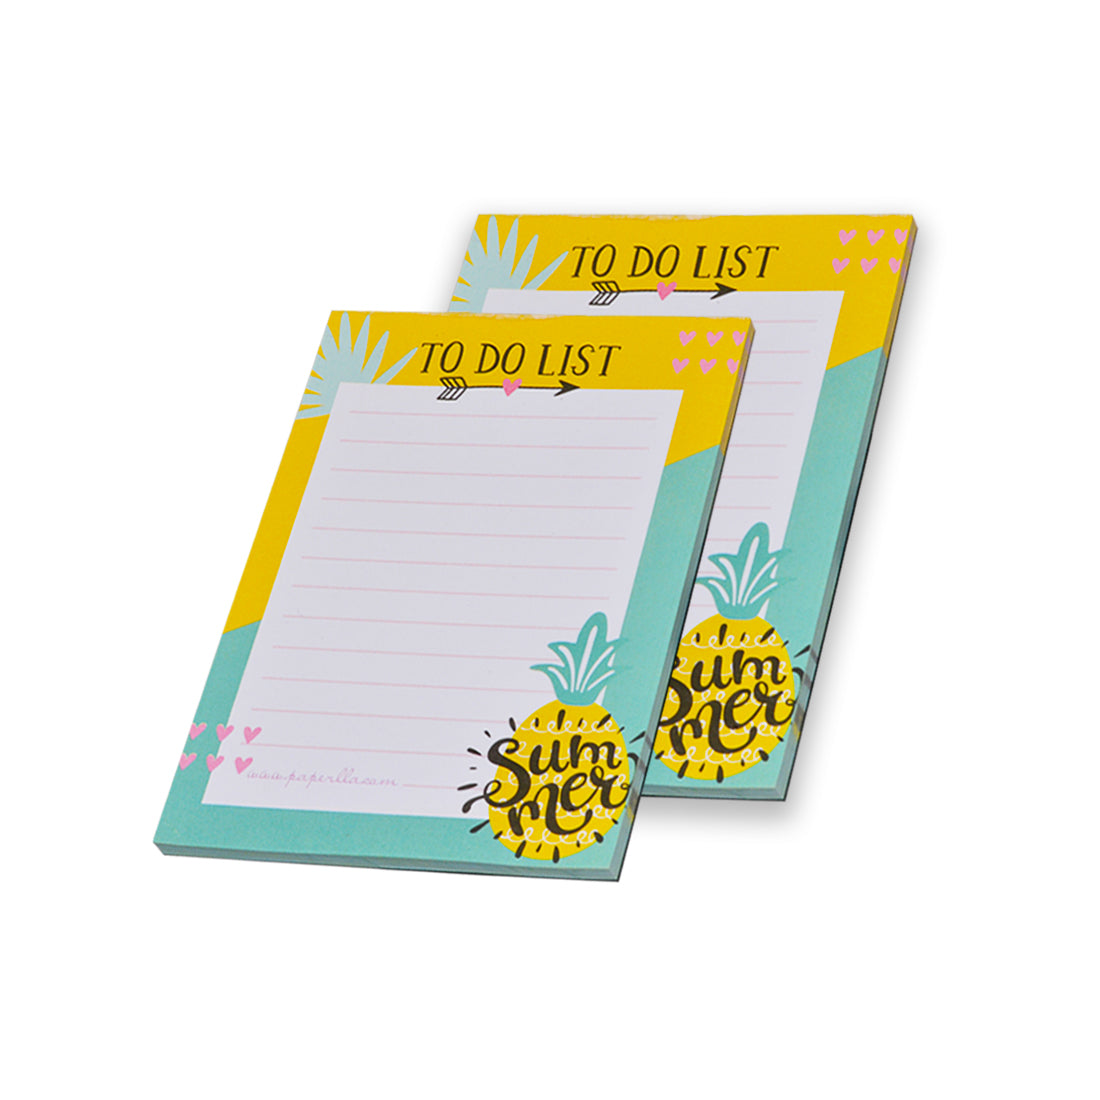 DAY PLANNER DIARY JOURNAL, TO DO LIST UNDATED NOTEPADS OFFICE DIARY MEMO PADS GIFT FOR TEACHERS BY STUDENTS, SET OF 4